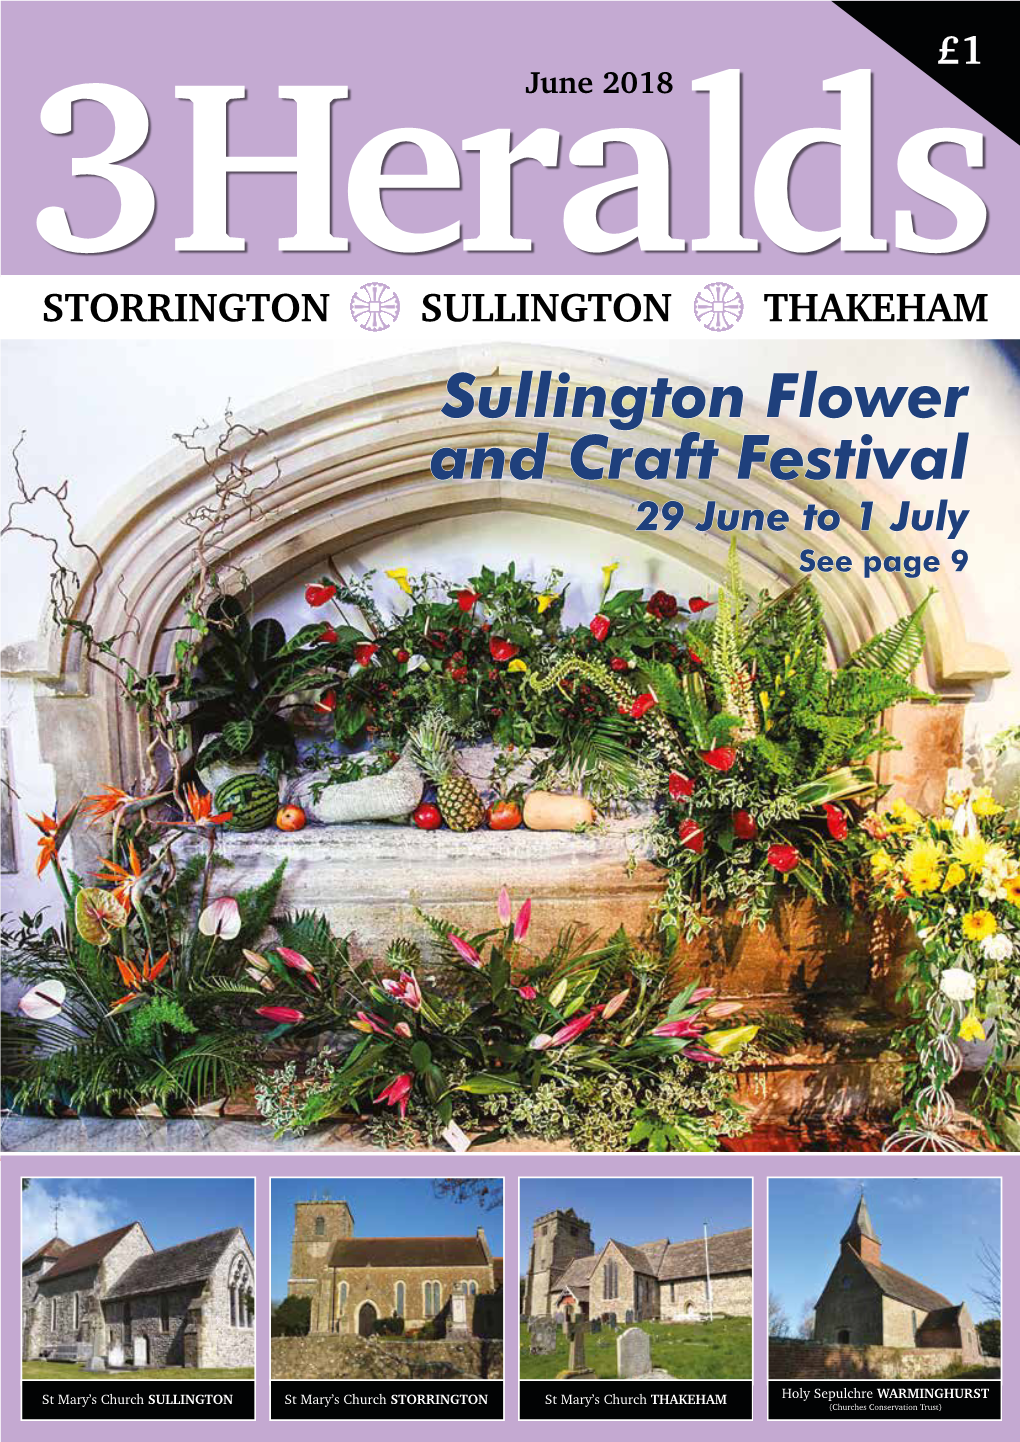 Sullington Flower and Craft Festival 29 June to 1 July See Page 9